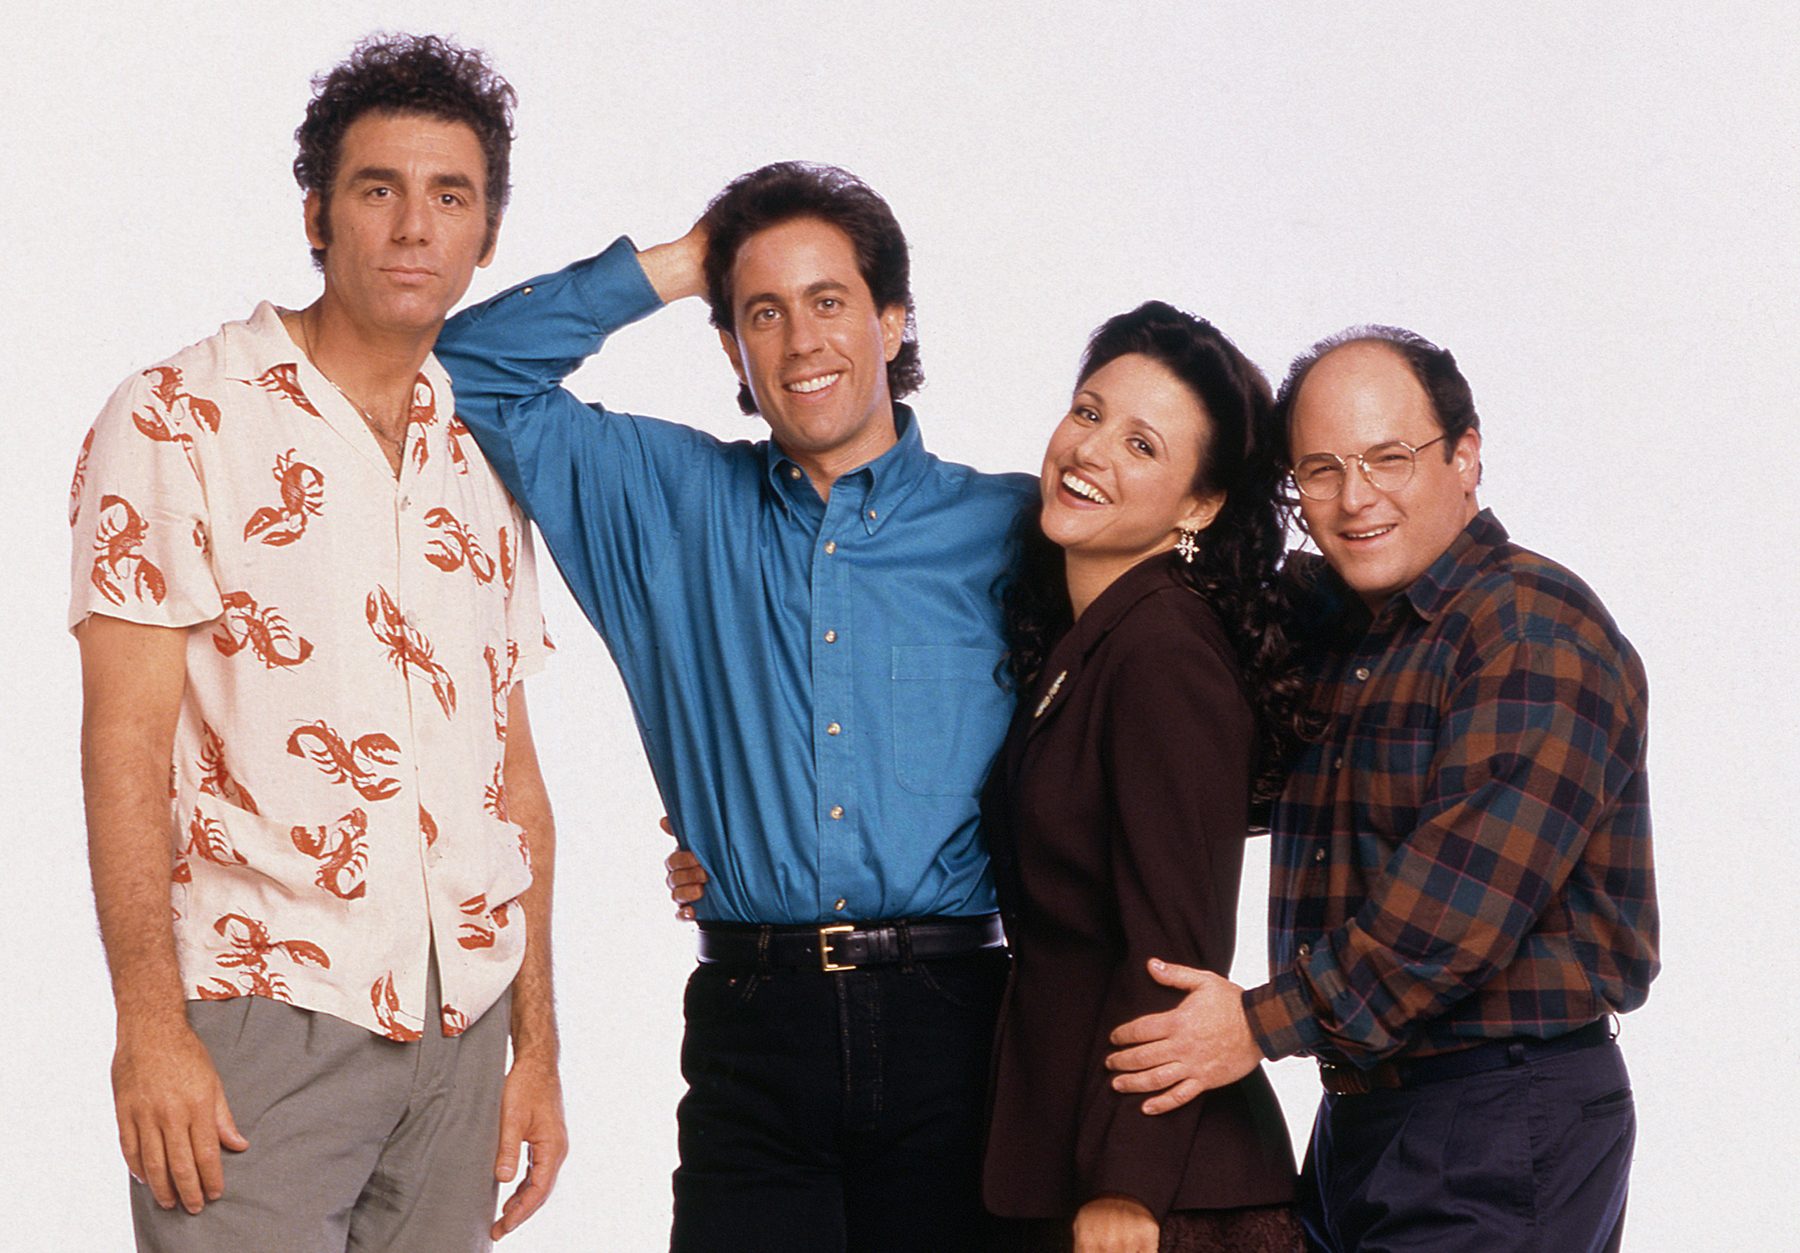 100 Best 'Seinfeld' Characters: From Soup Nazis to Nuts - CBNC